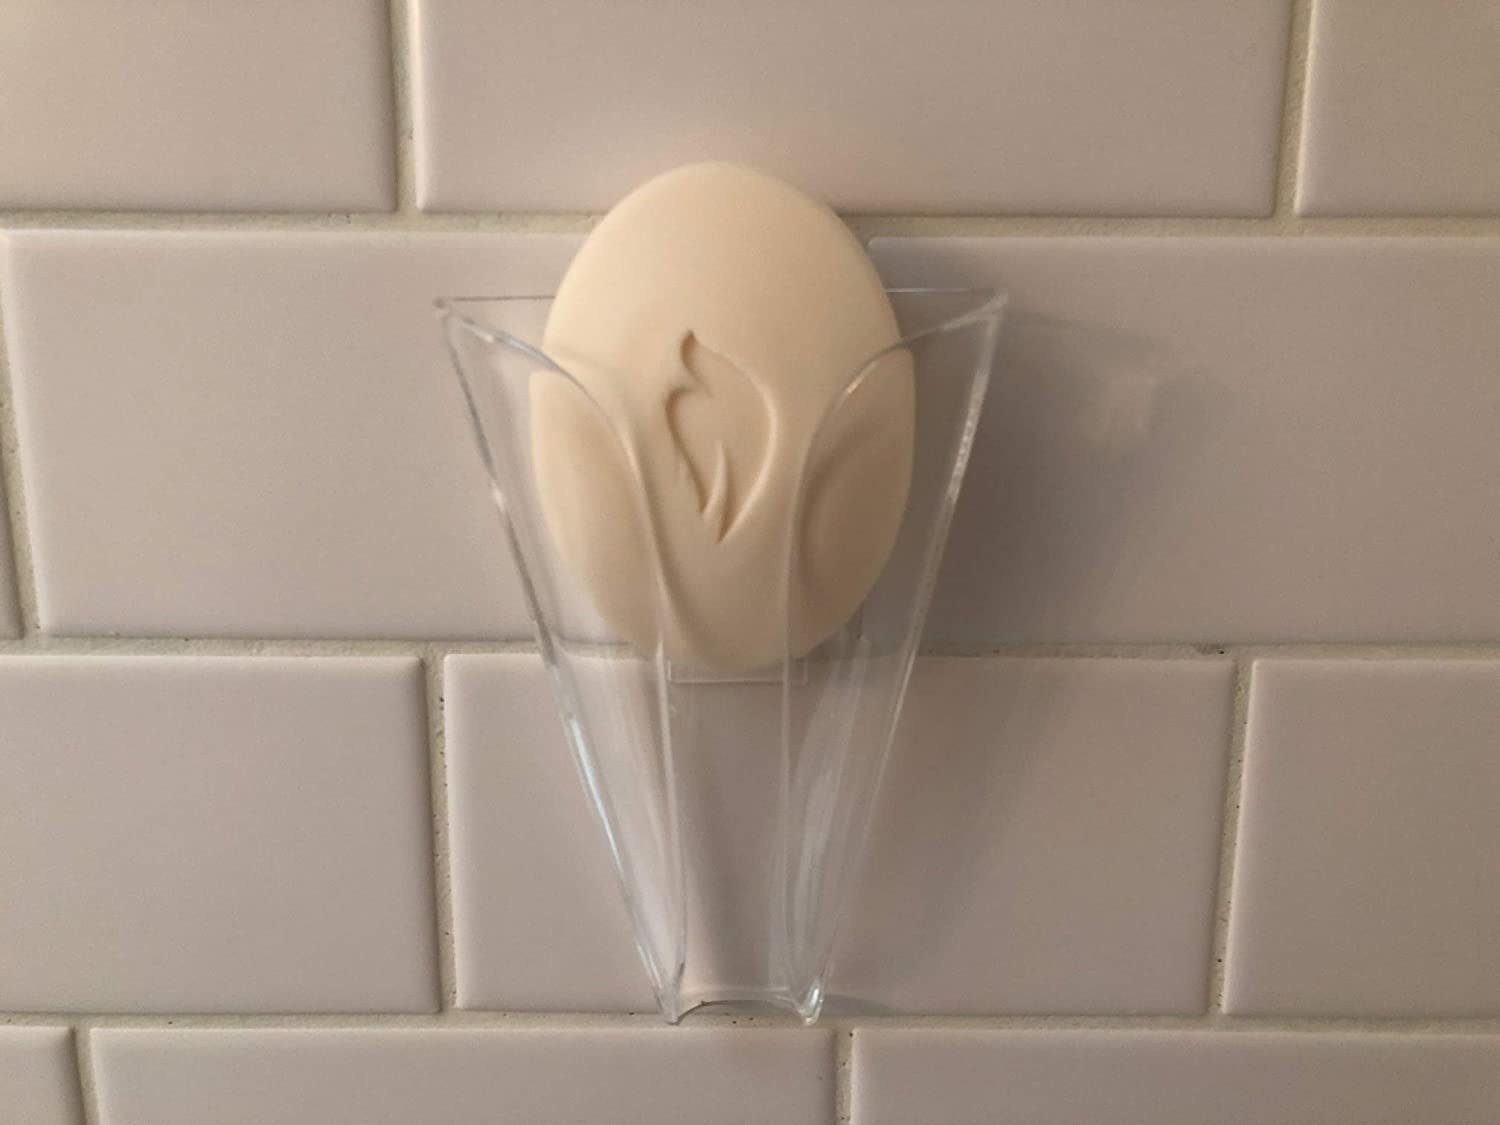 A bar of soap in the transparent soap holder